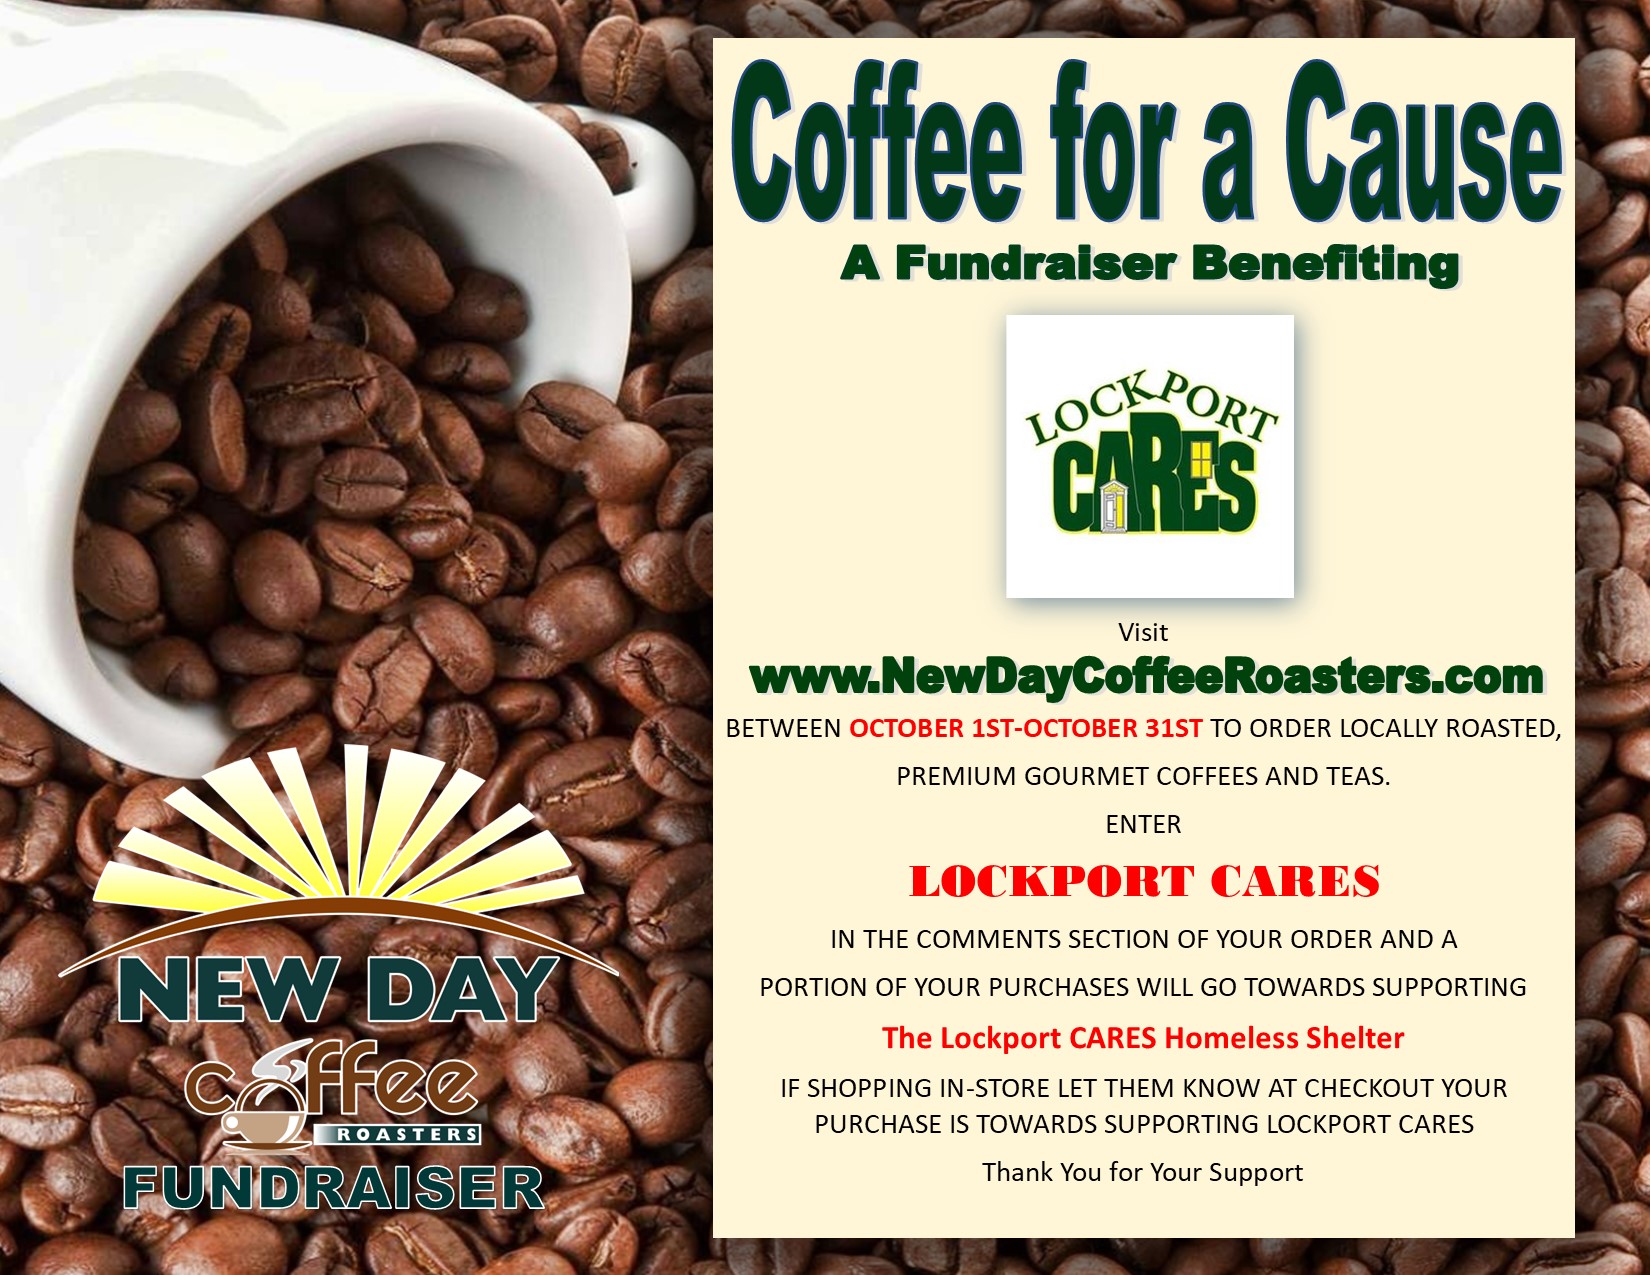 New Day Coffee Roasters Fundraiser 2023 image